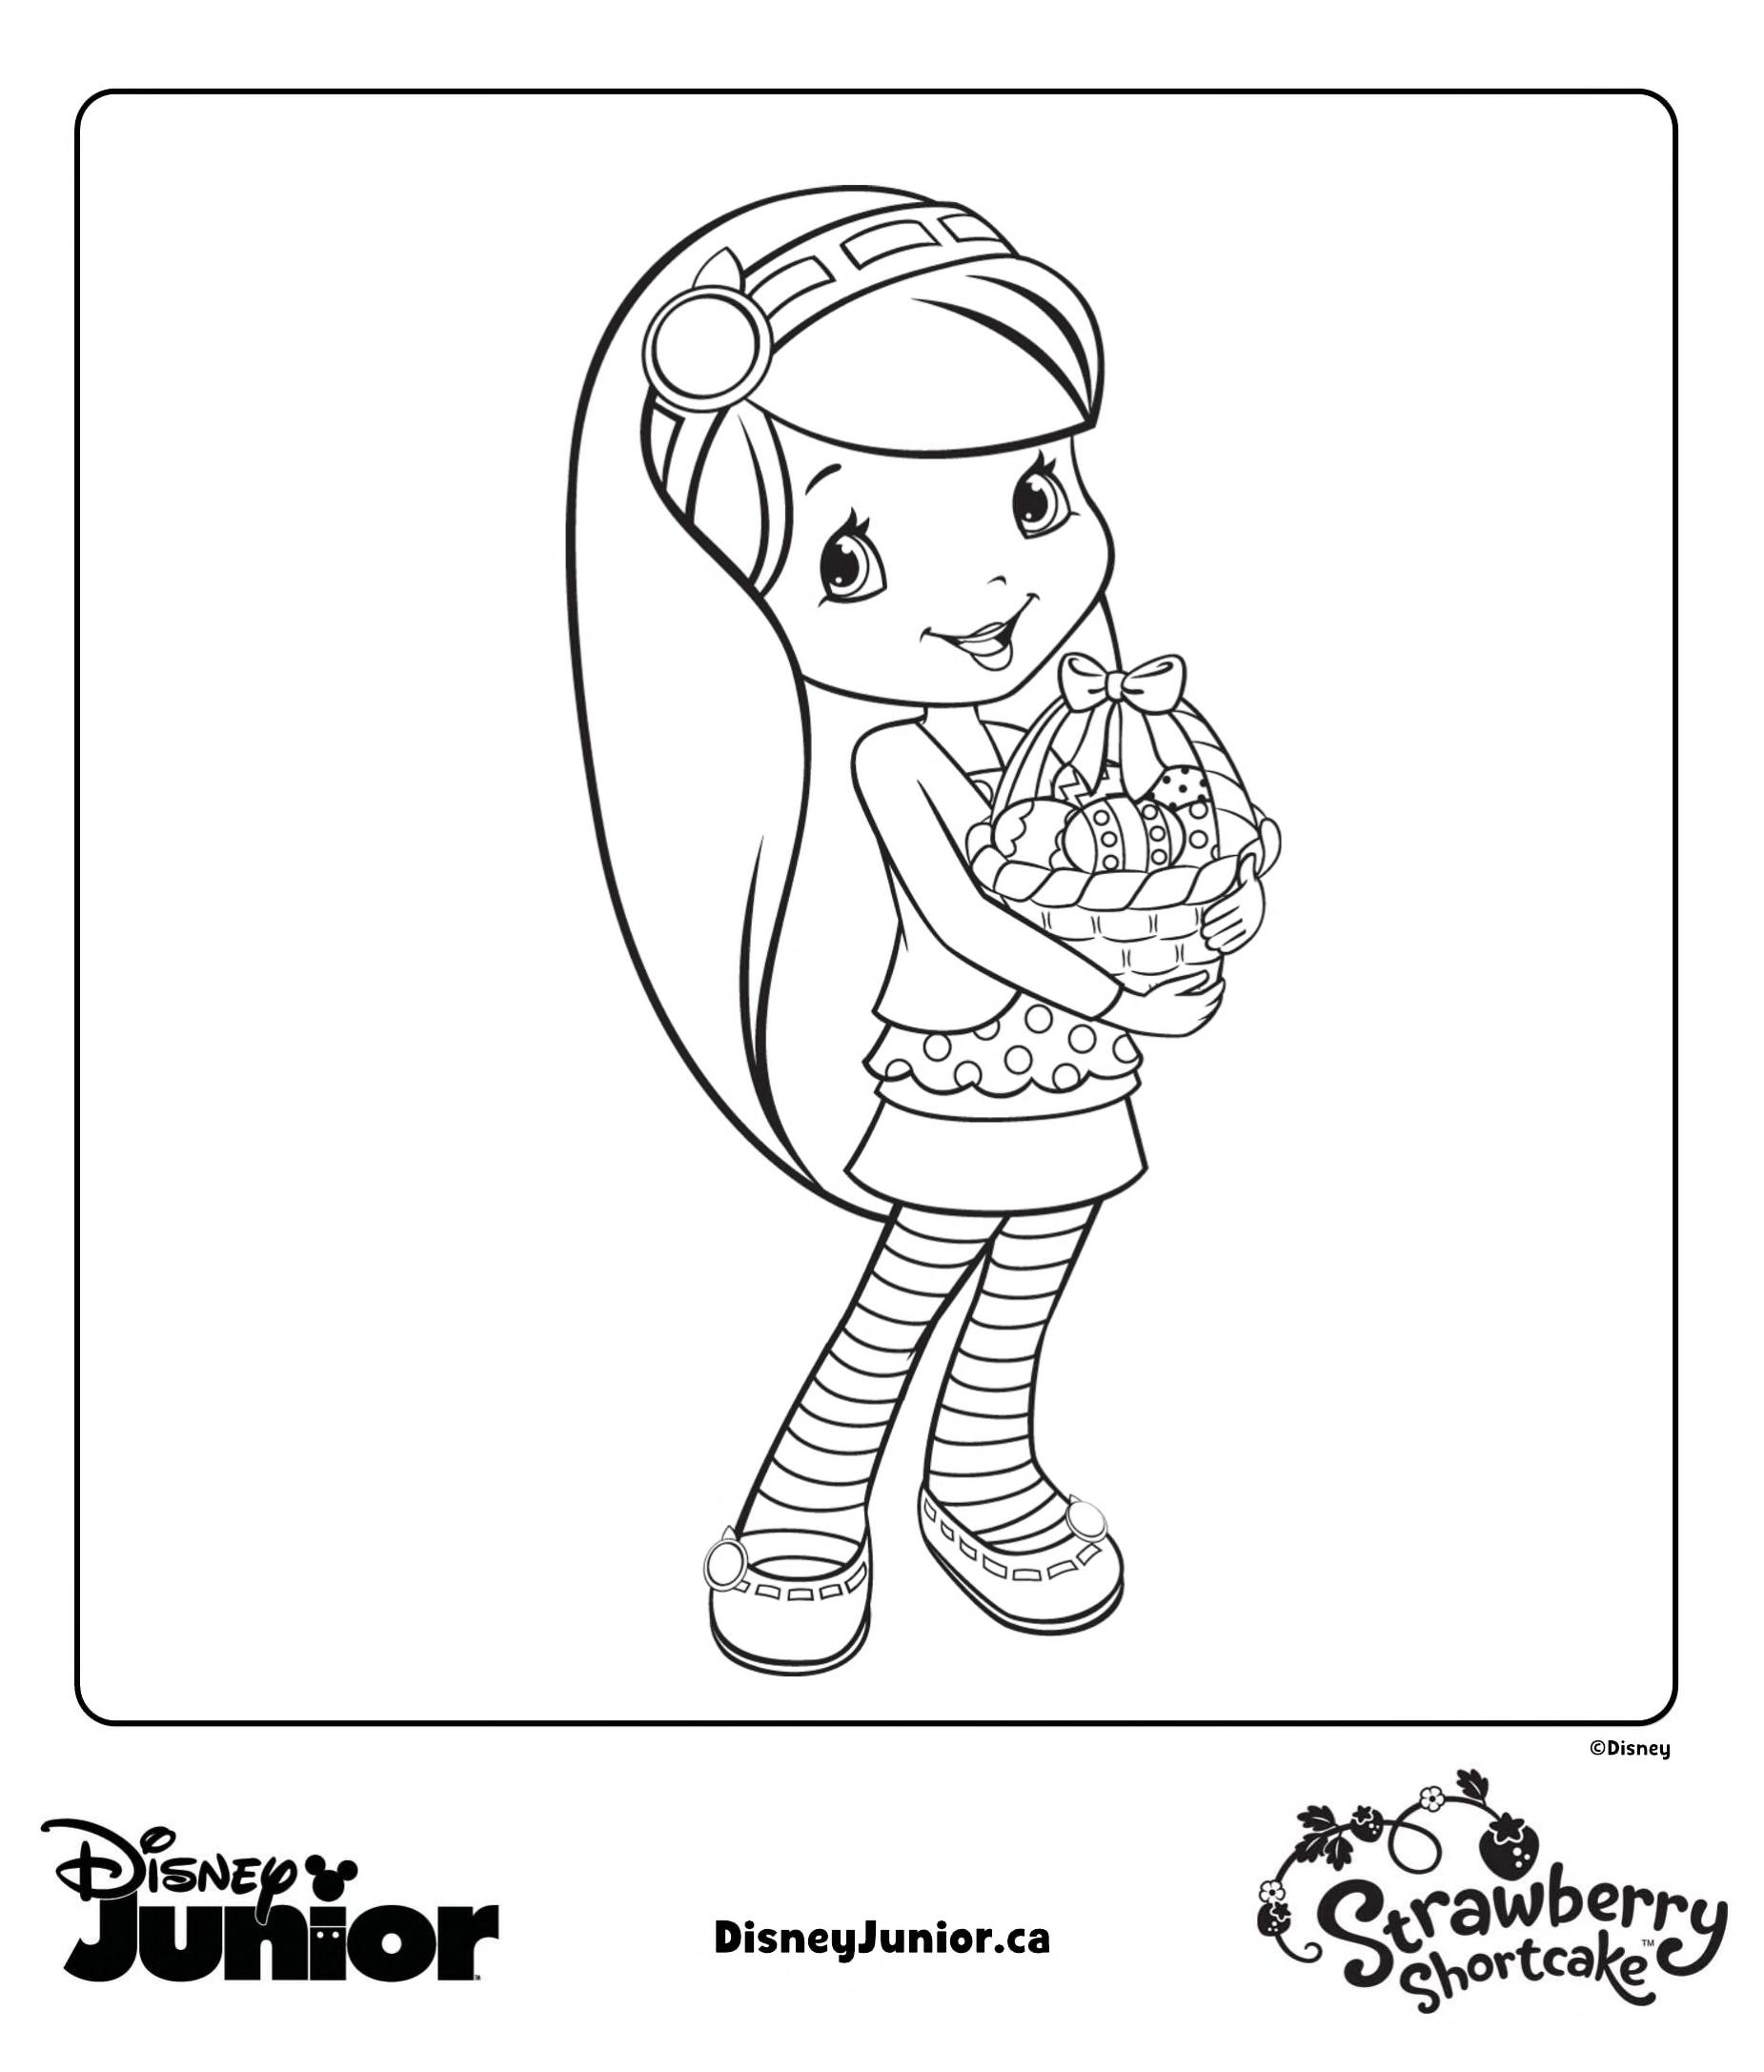 Disney Junior Canada Strawberry shortcake Coloring Sheet 4 : Free Download,  Borrow, and Streaming : Internet Archive